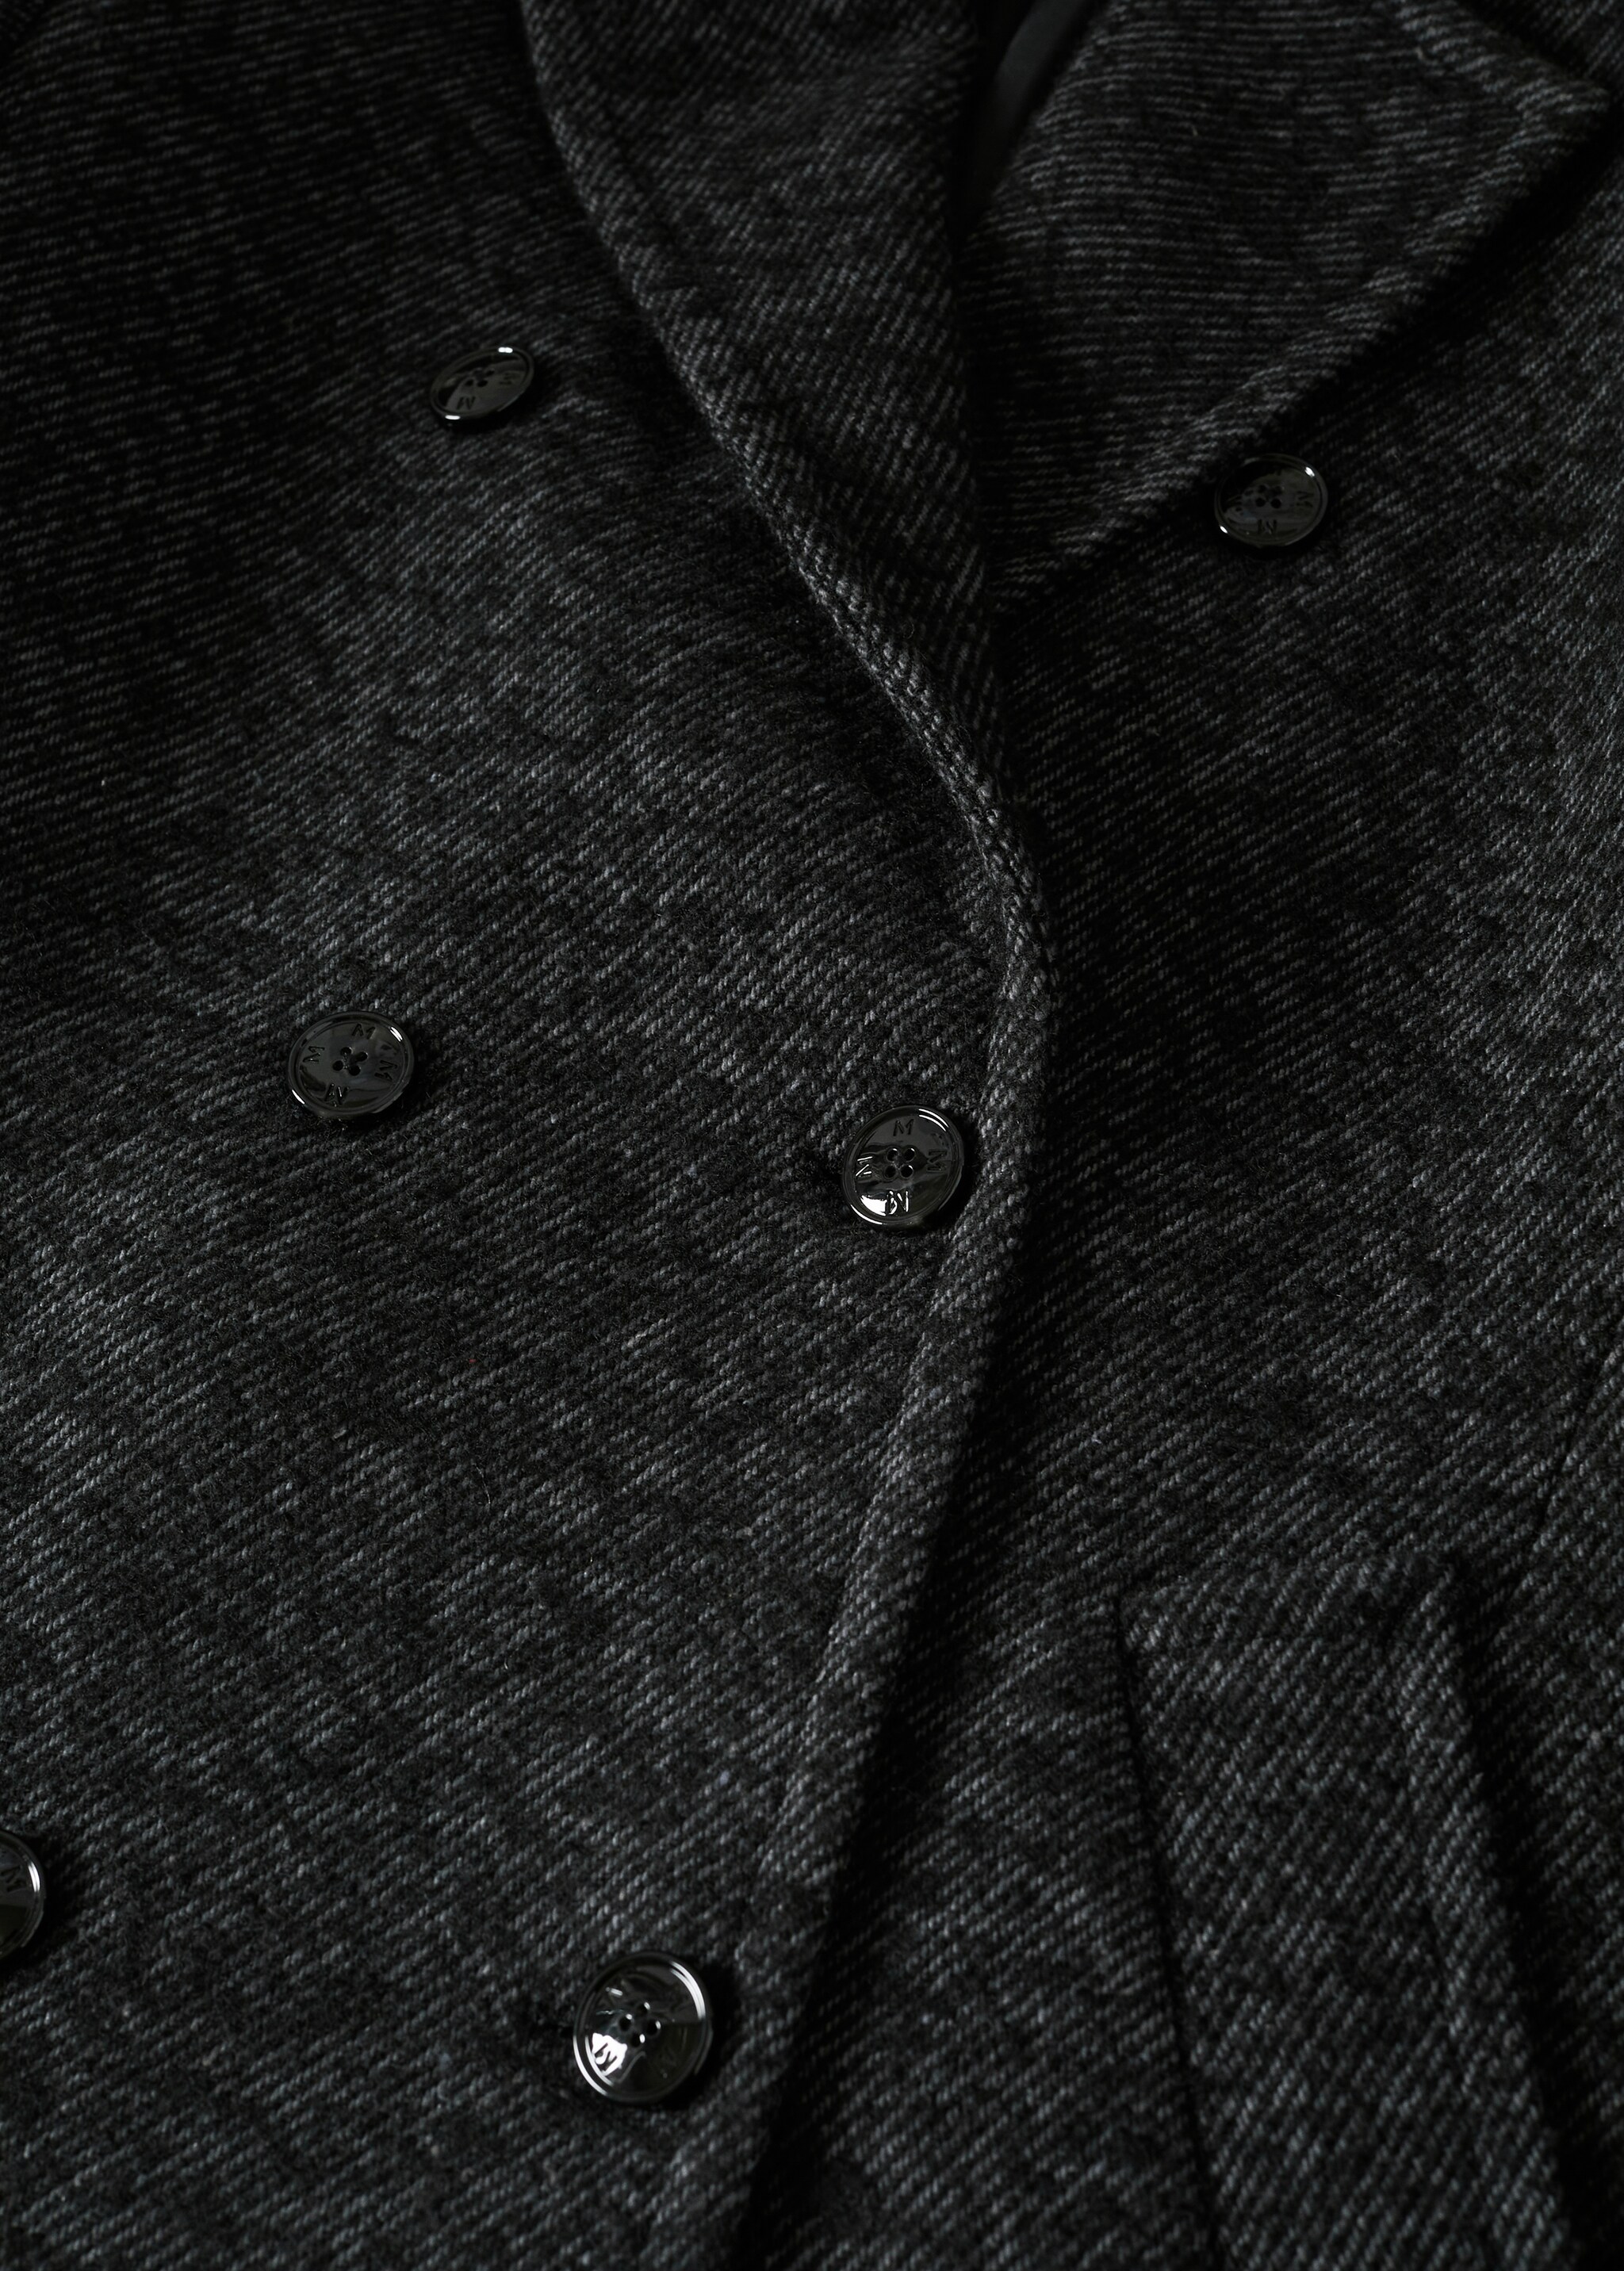 Wrap coat with lapels - Details of the article 8